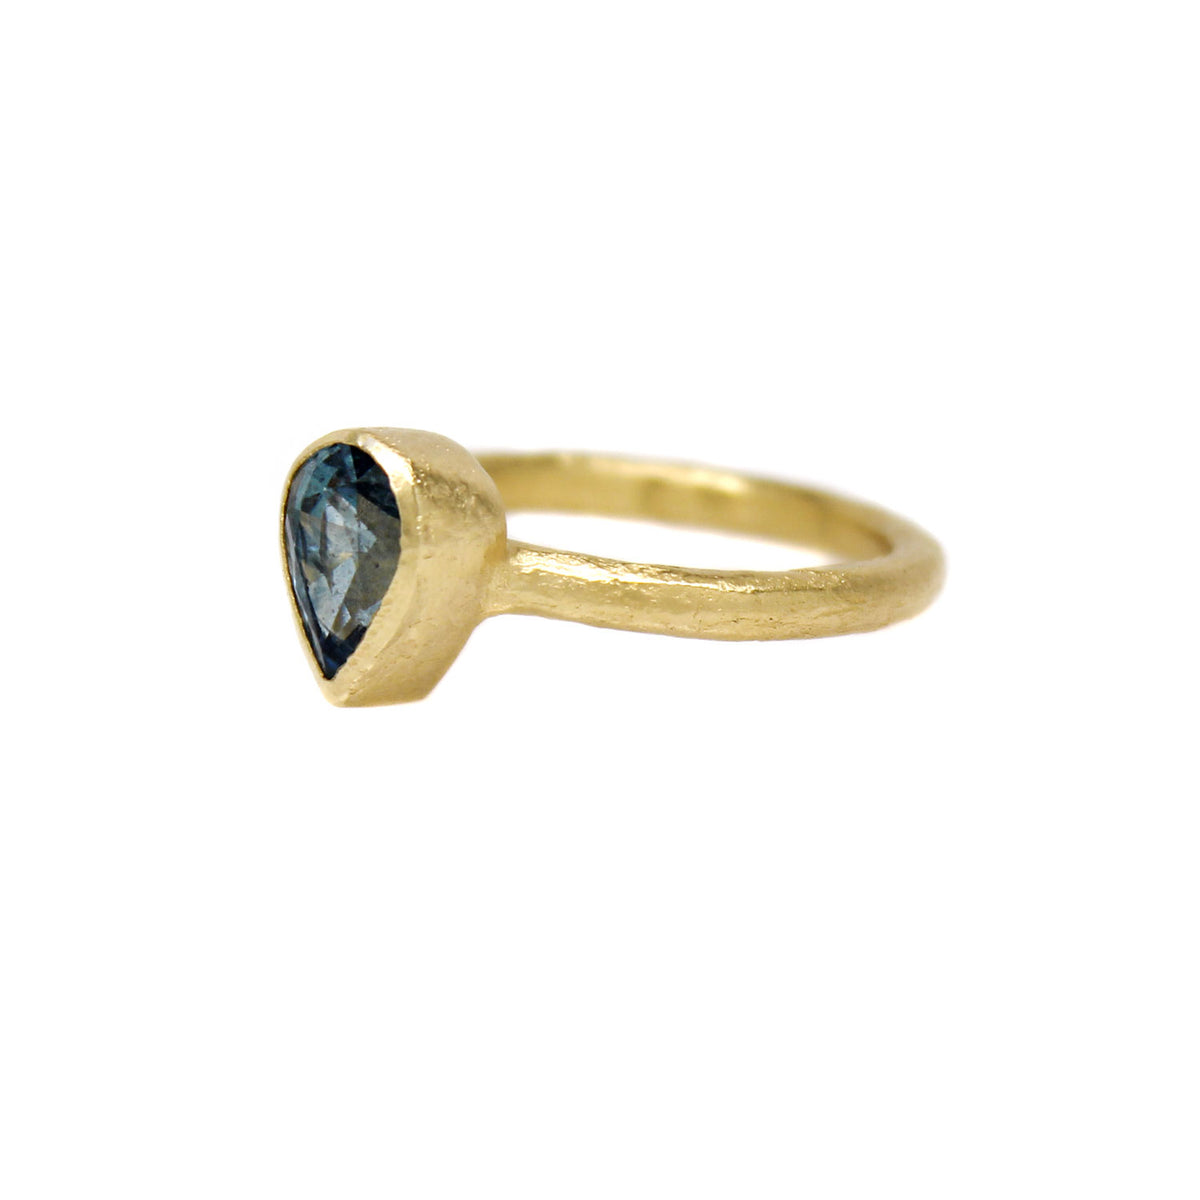 Thick Textured Rail Ring with One-of-a-Kind Pear Shaped Sapphire